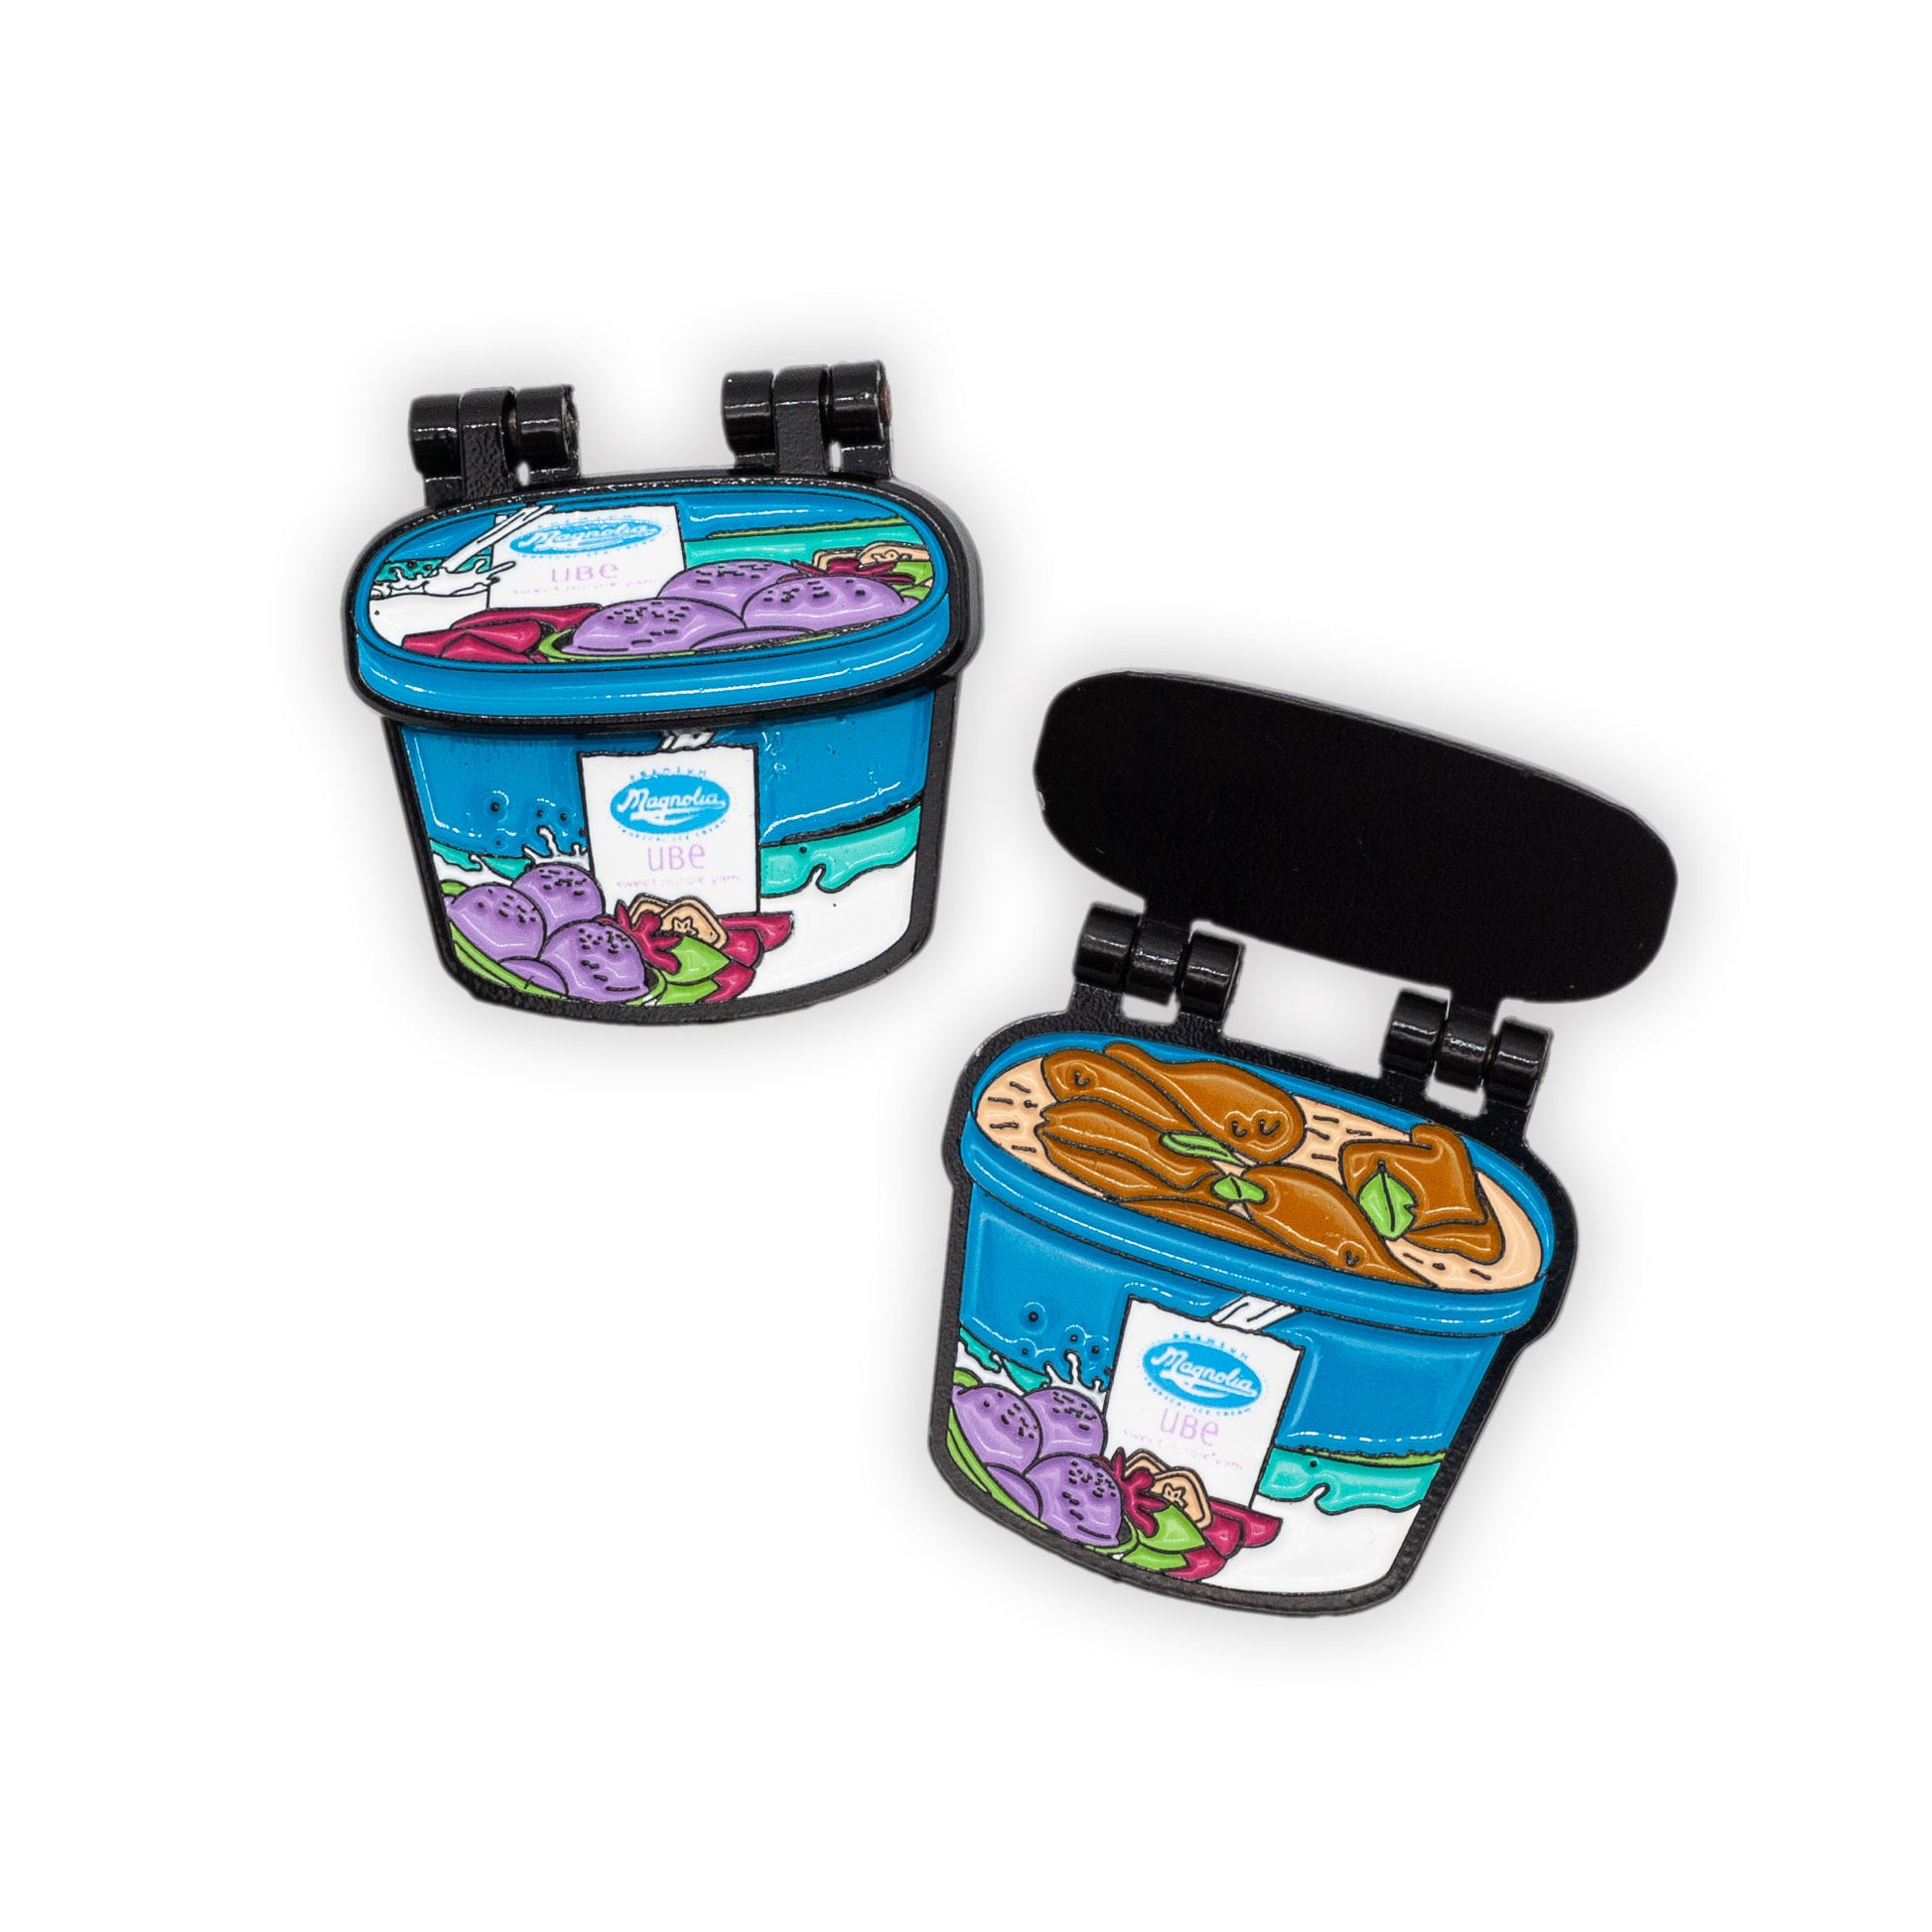 magnolia ice cream tub enamel pin that hinges open to reveal frozen chicken adobo. The ultimate Filipino Tupperware! Pins over white background.